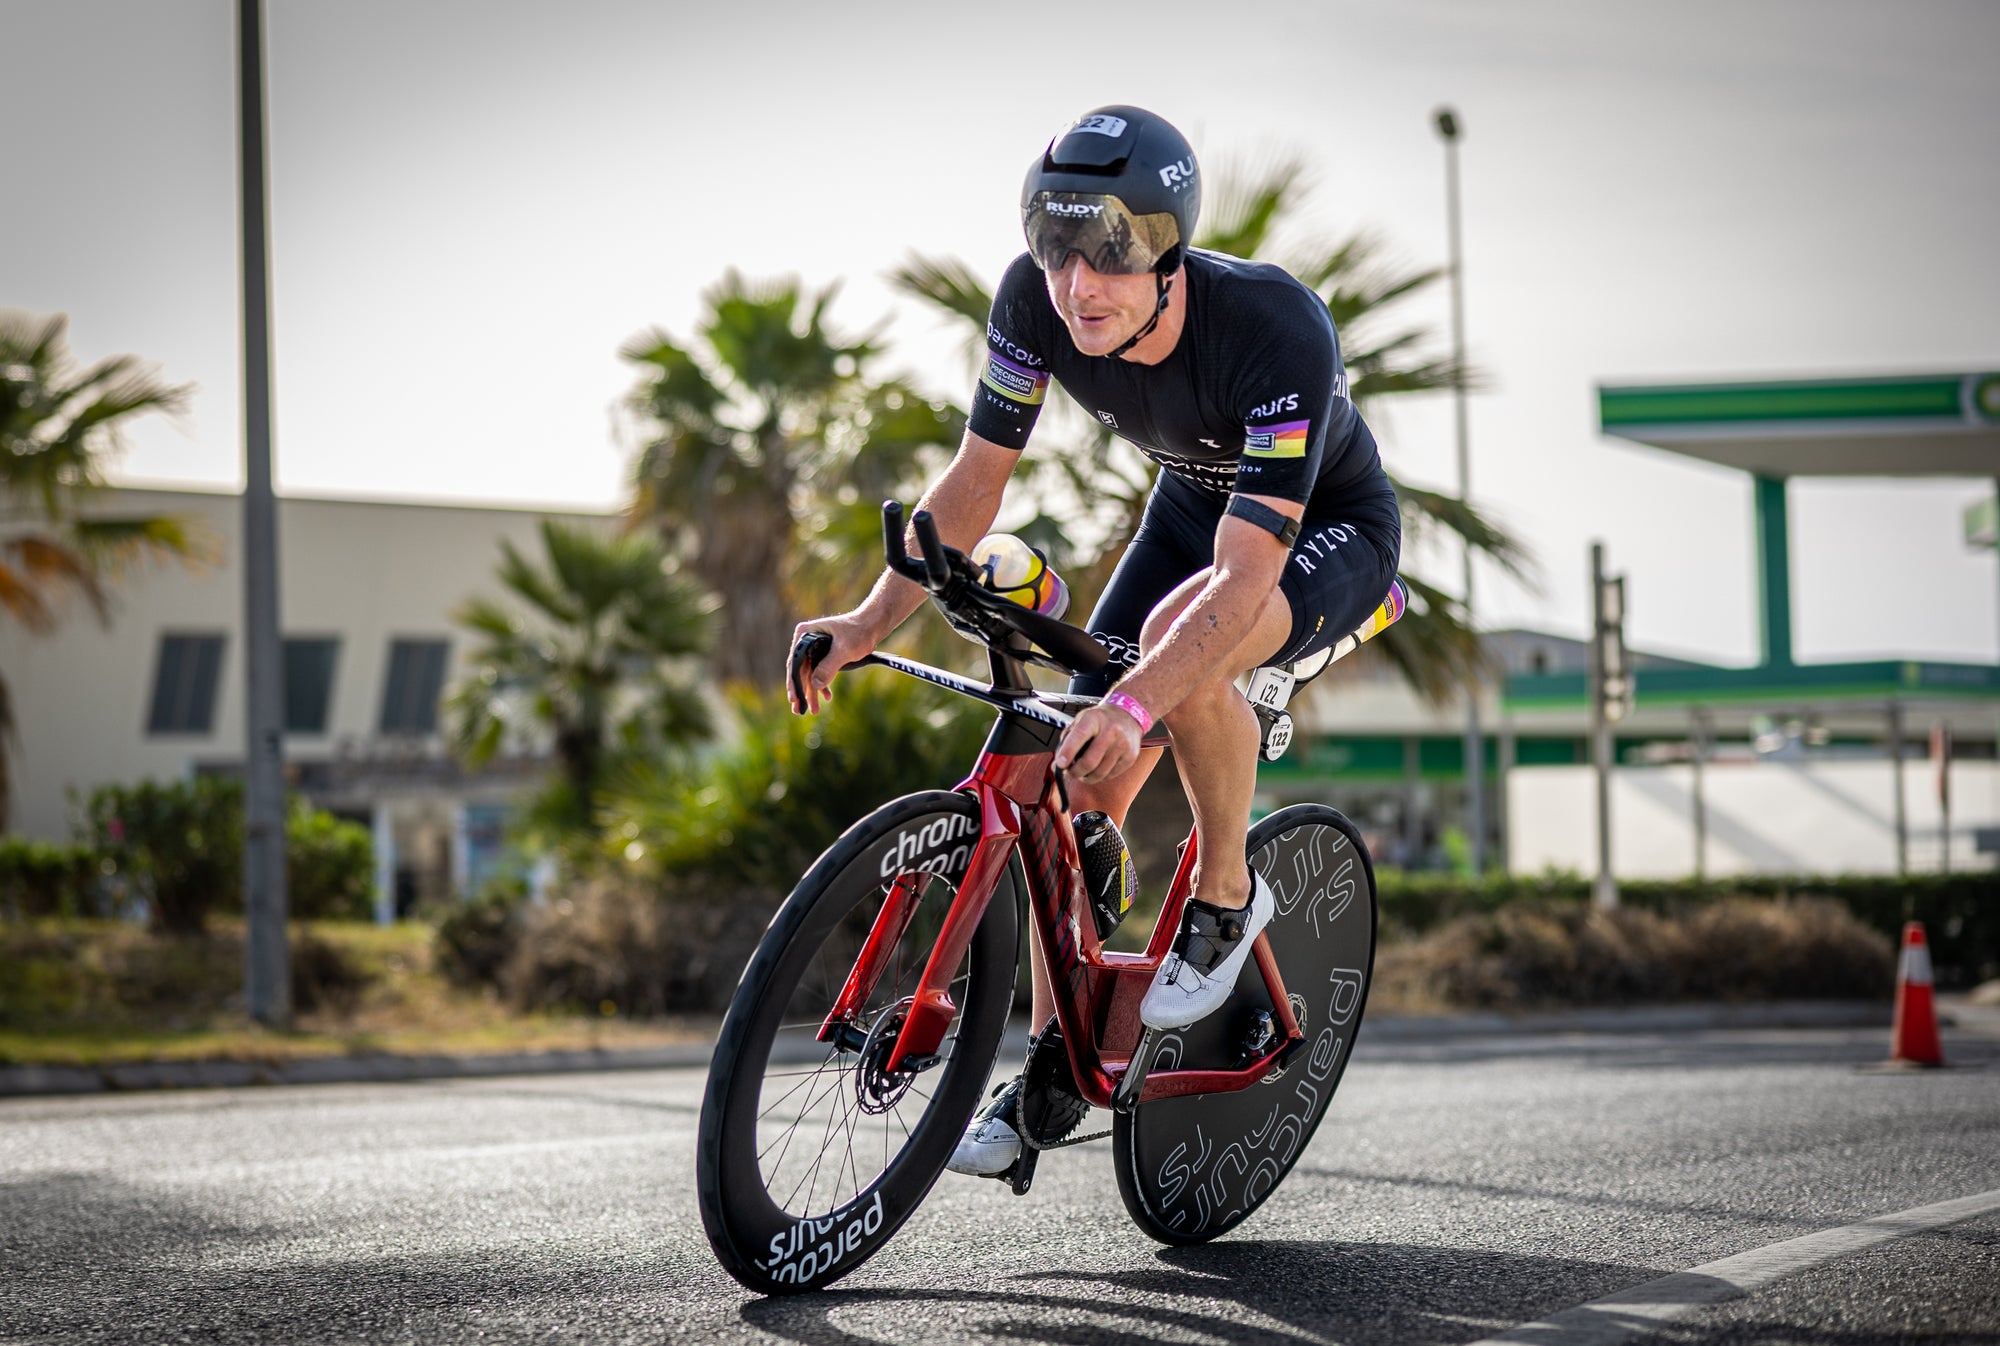 Kyle Smith wins Ironman 70.3 Taupo: Race Report